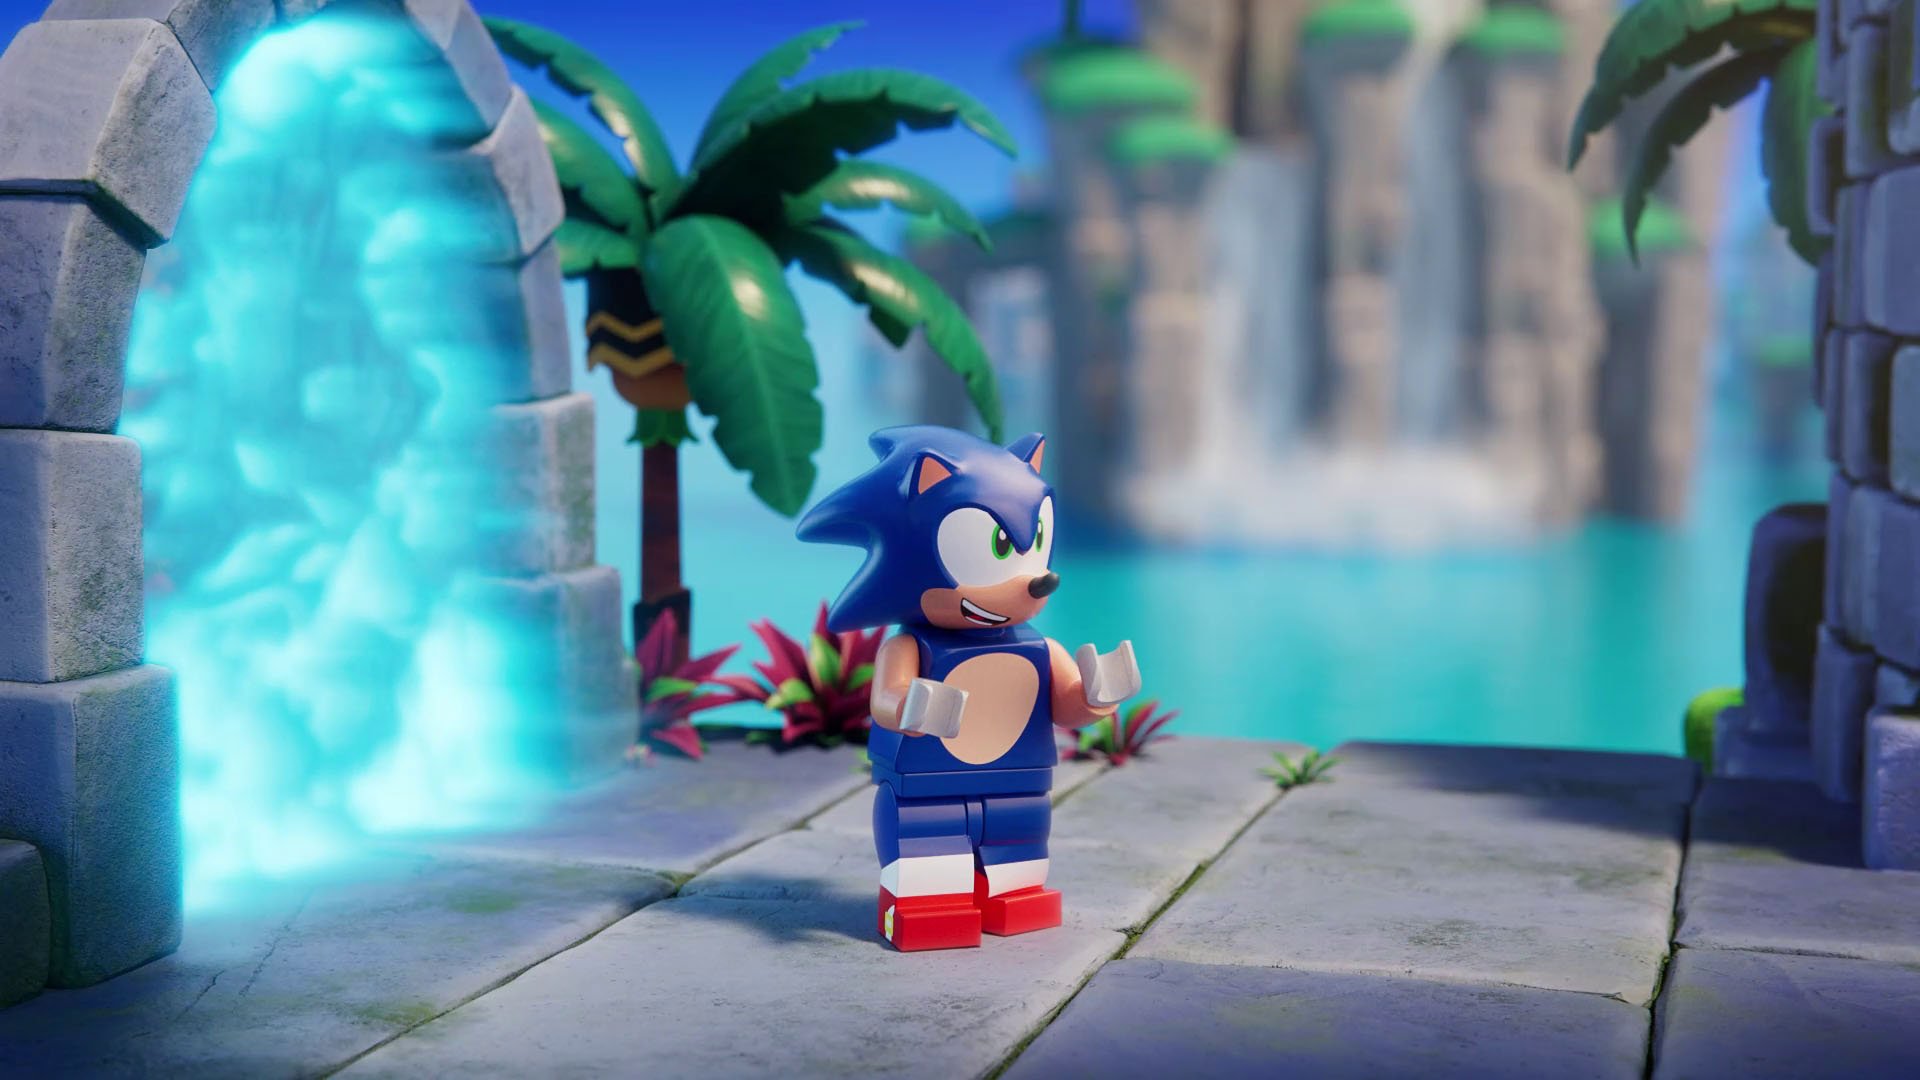 Sonic Frontiers Update 2 and More Lego Collaboration Details to